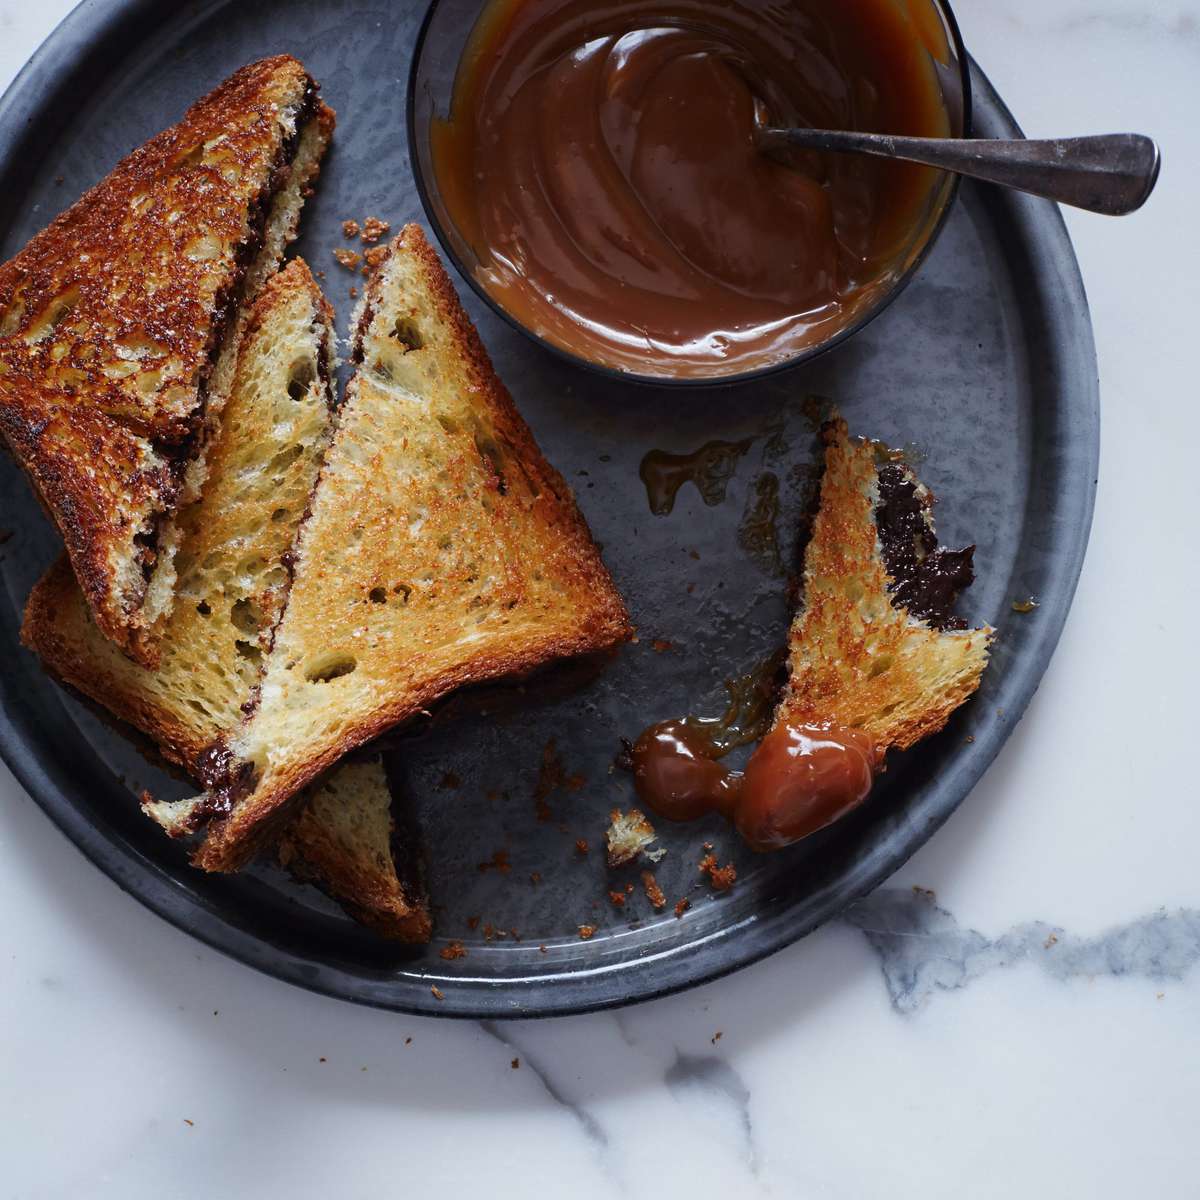 Grilled Chocolate Sandwiches with Caramel Sauce 